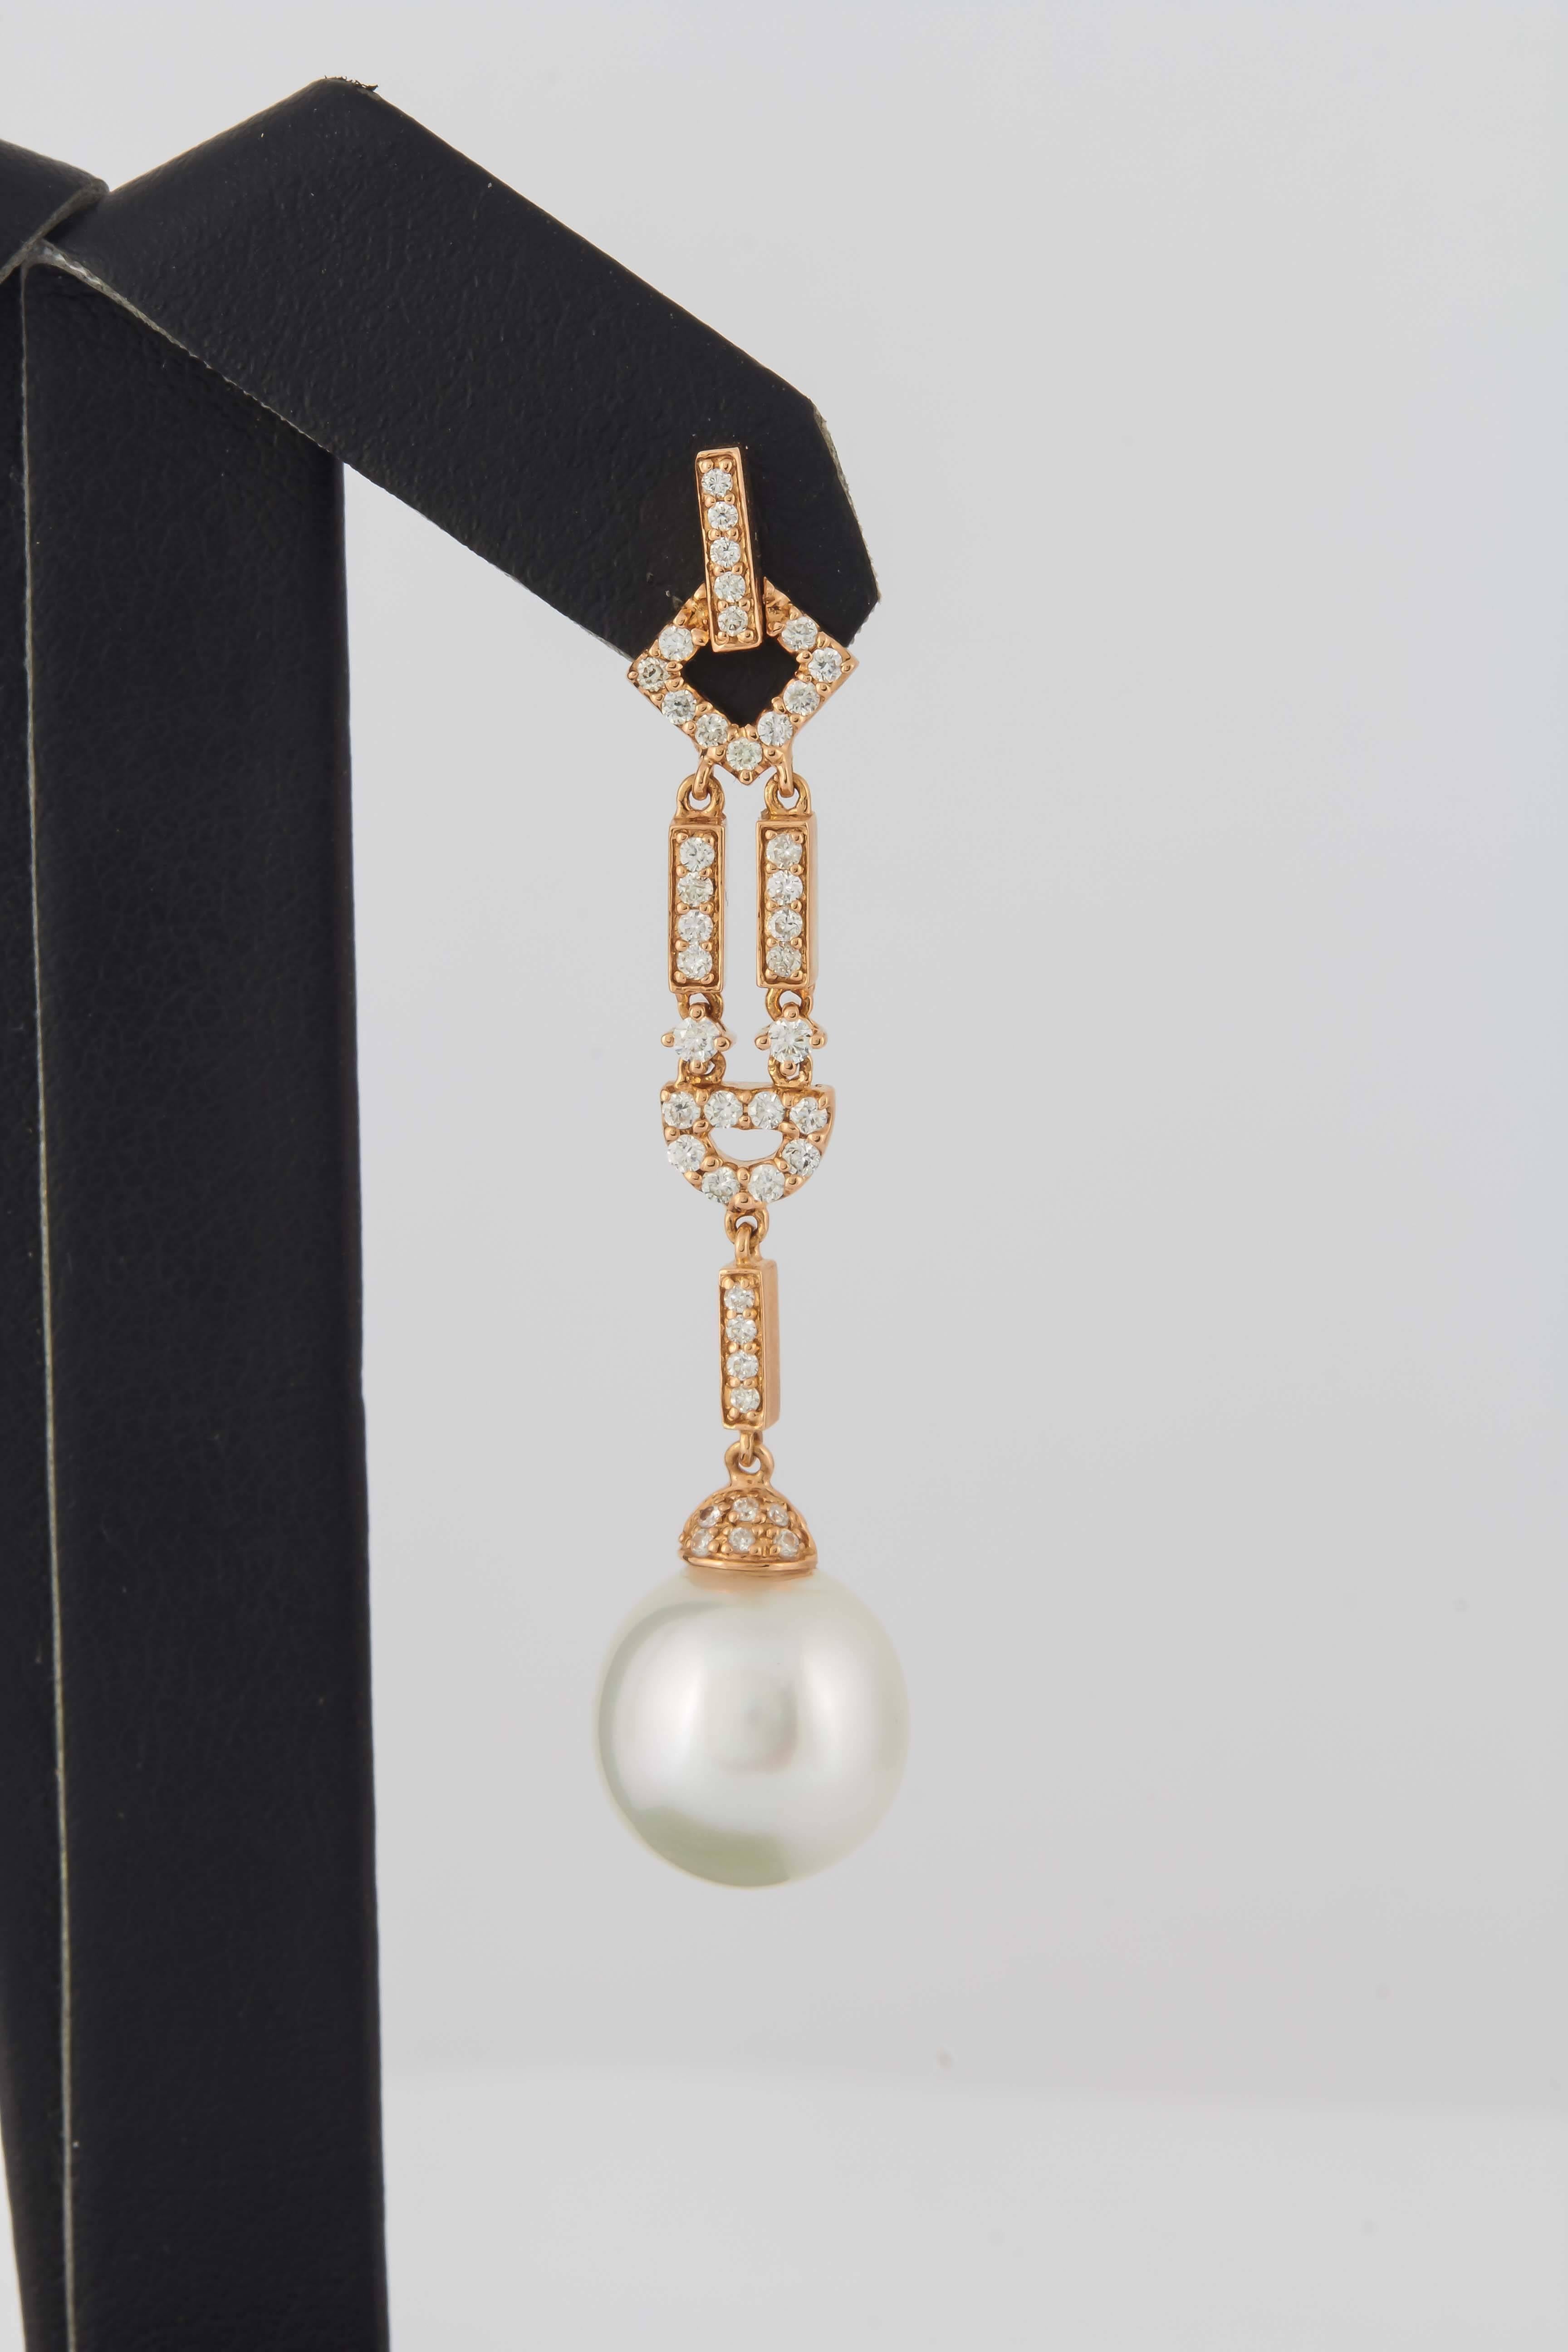 18K Rose gold drop earrings featuring 84 round brilliants weighing 0.76 carats and two South Sea Pearls measuring 11-12 mm. 
Pearl luster: AA
Pearl Quality: AA
